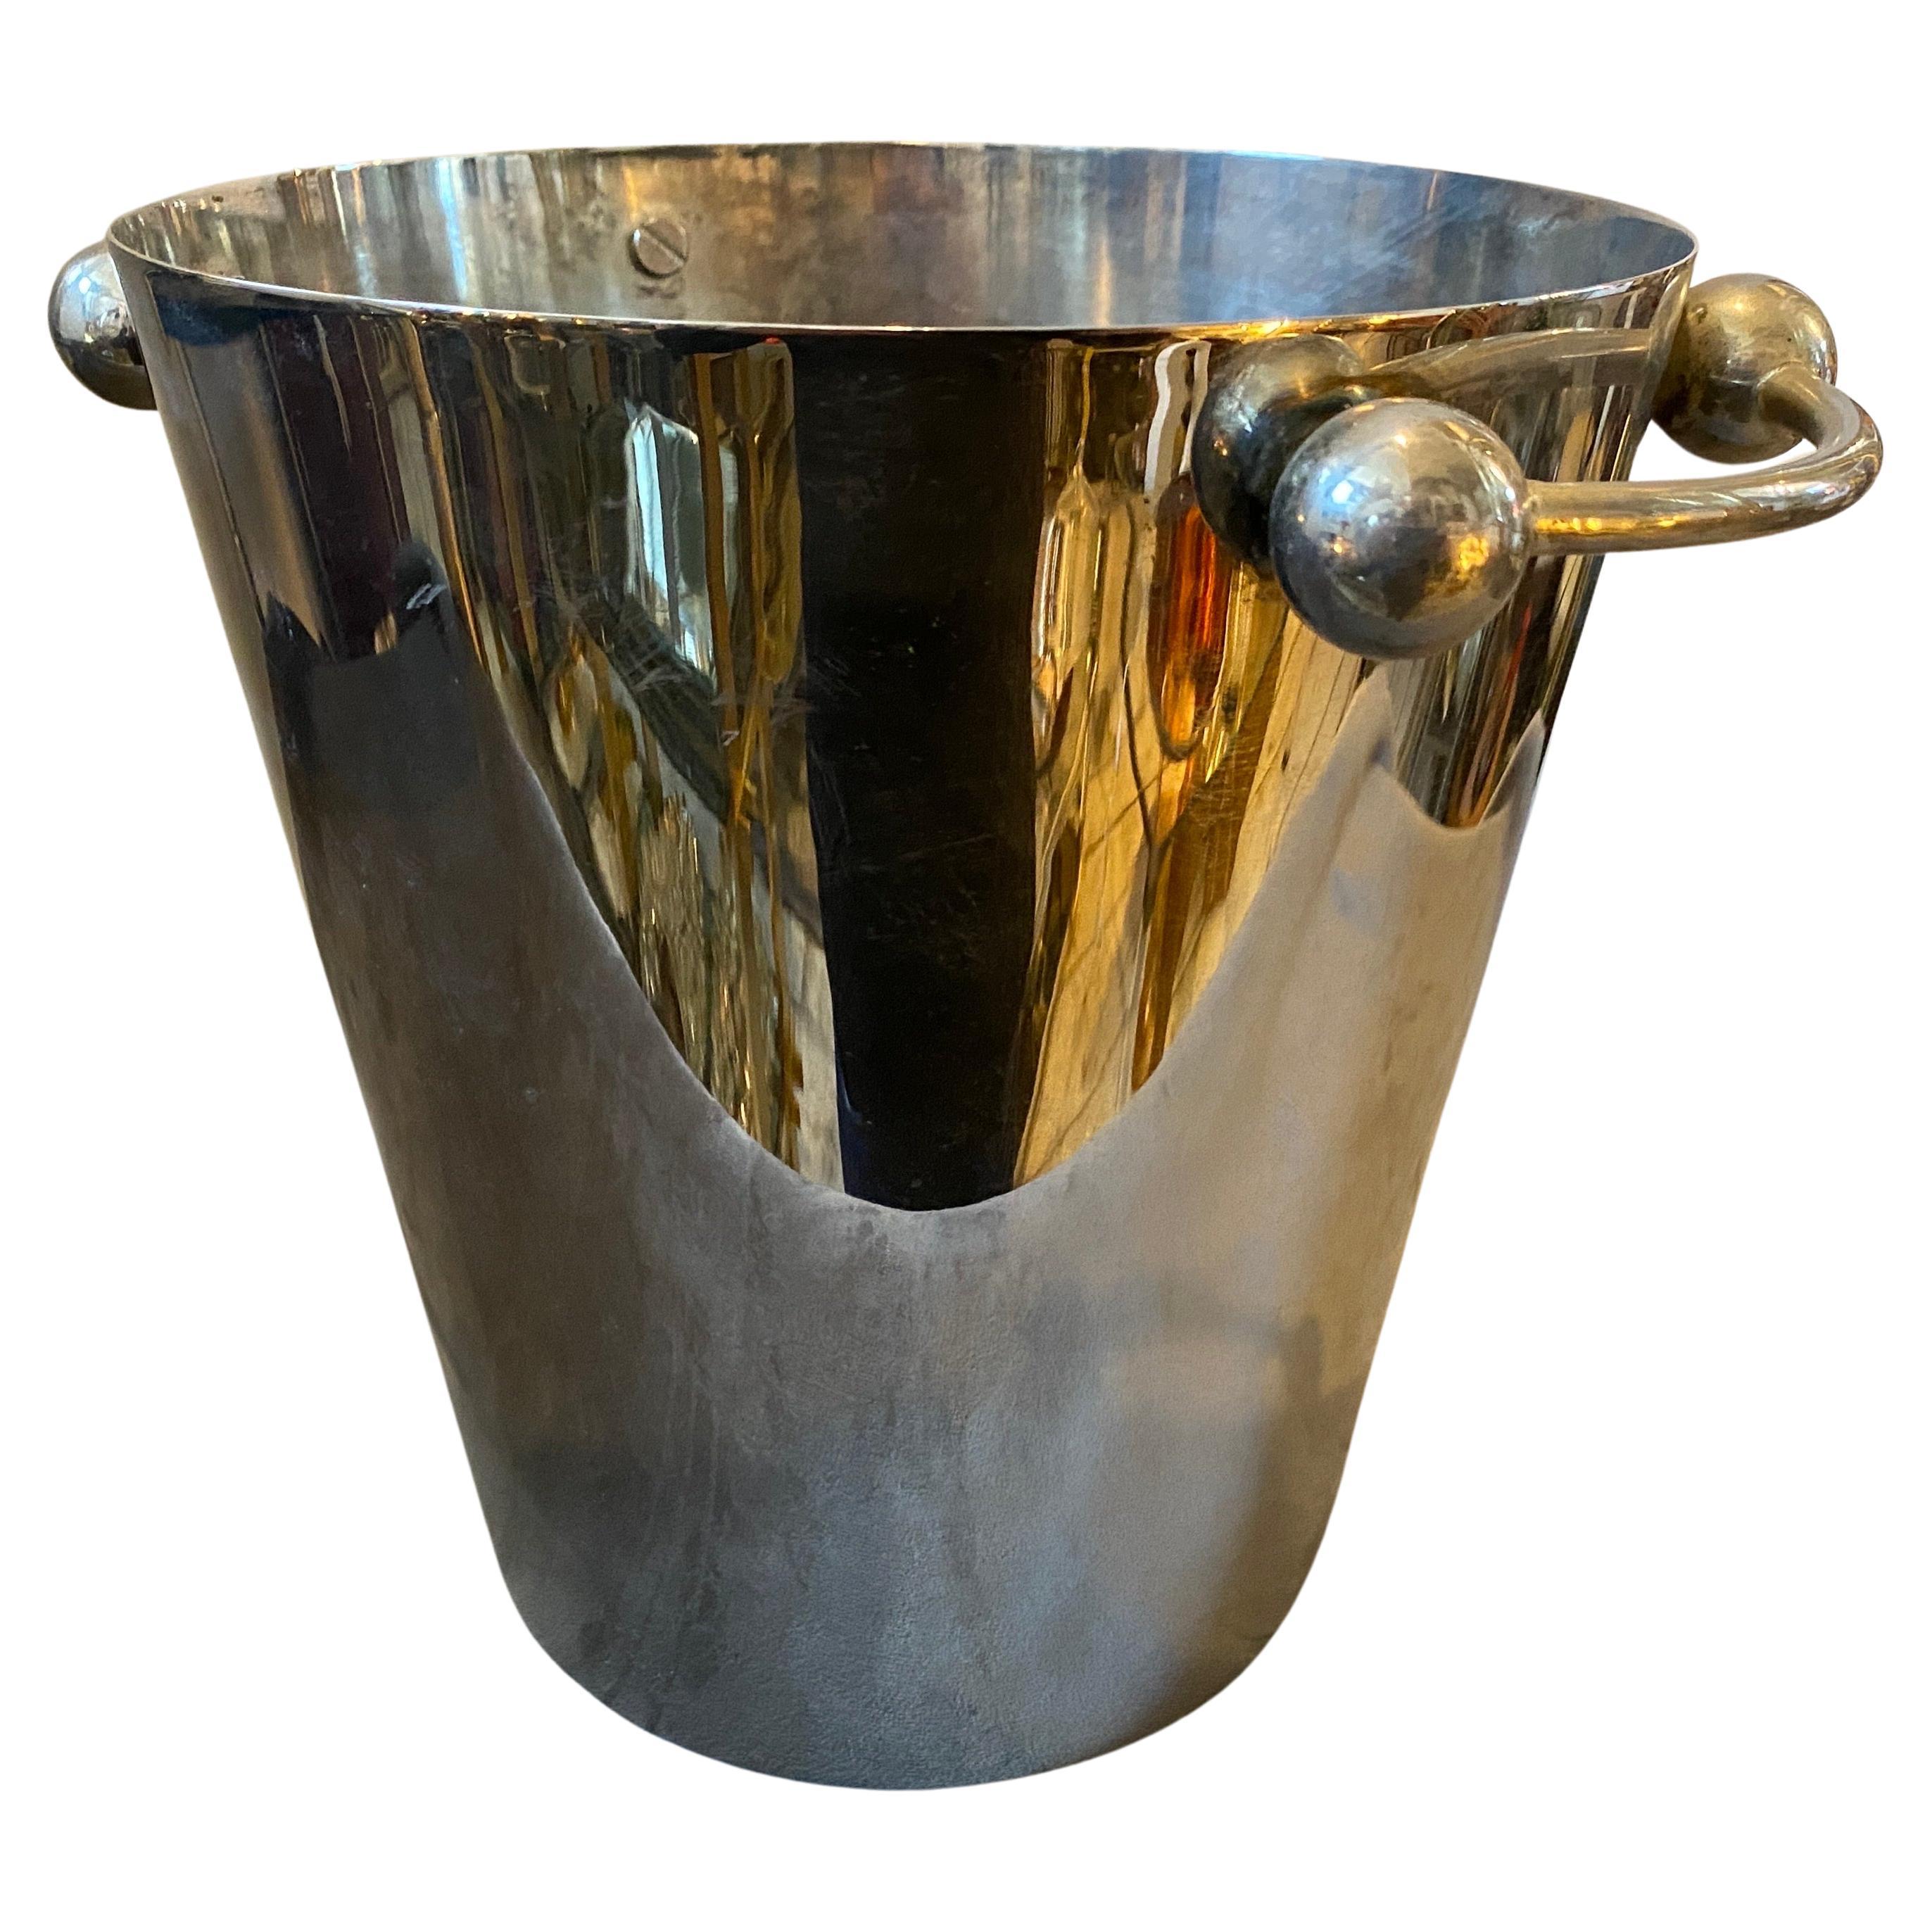 A silver plated wine cooler designed and manufactured in Italy in the Seventies in the style of Giò Ponti. It's in good conditions overall, it has just normal signs of use and age. This Wine cooler exhibit sleek lines, minimalist design, and